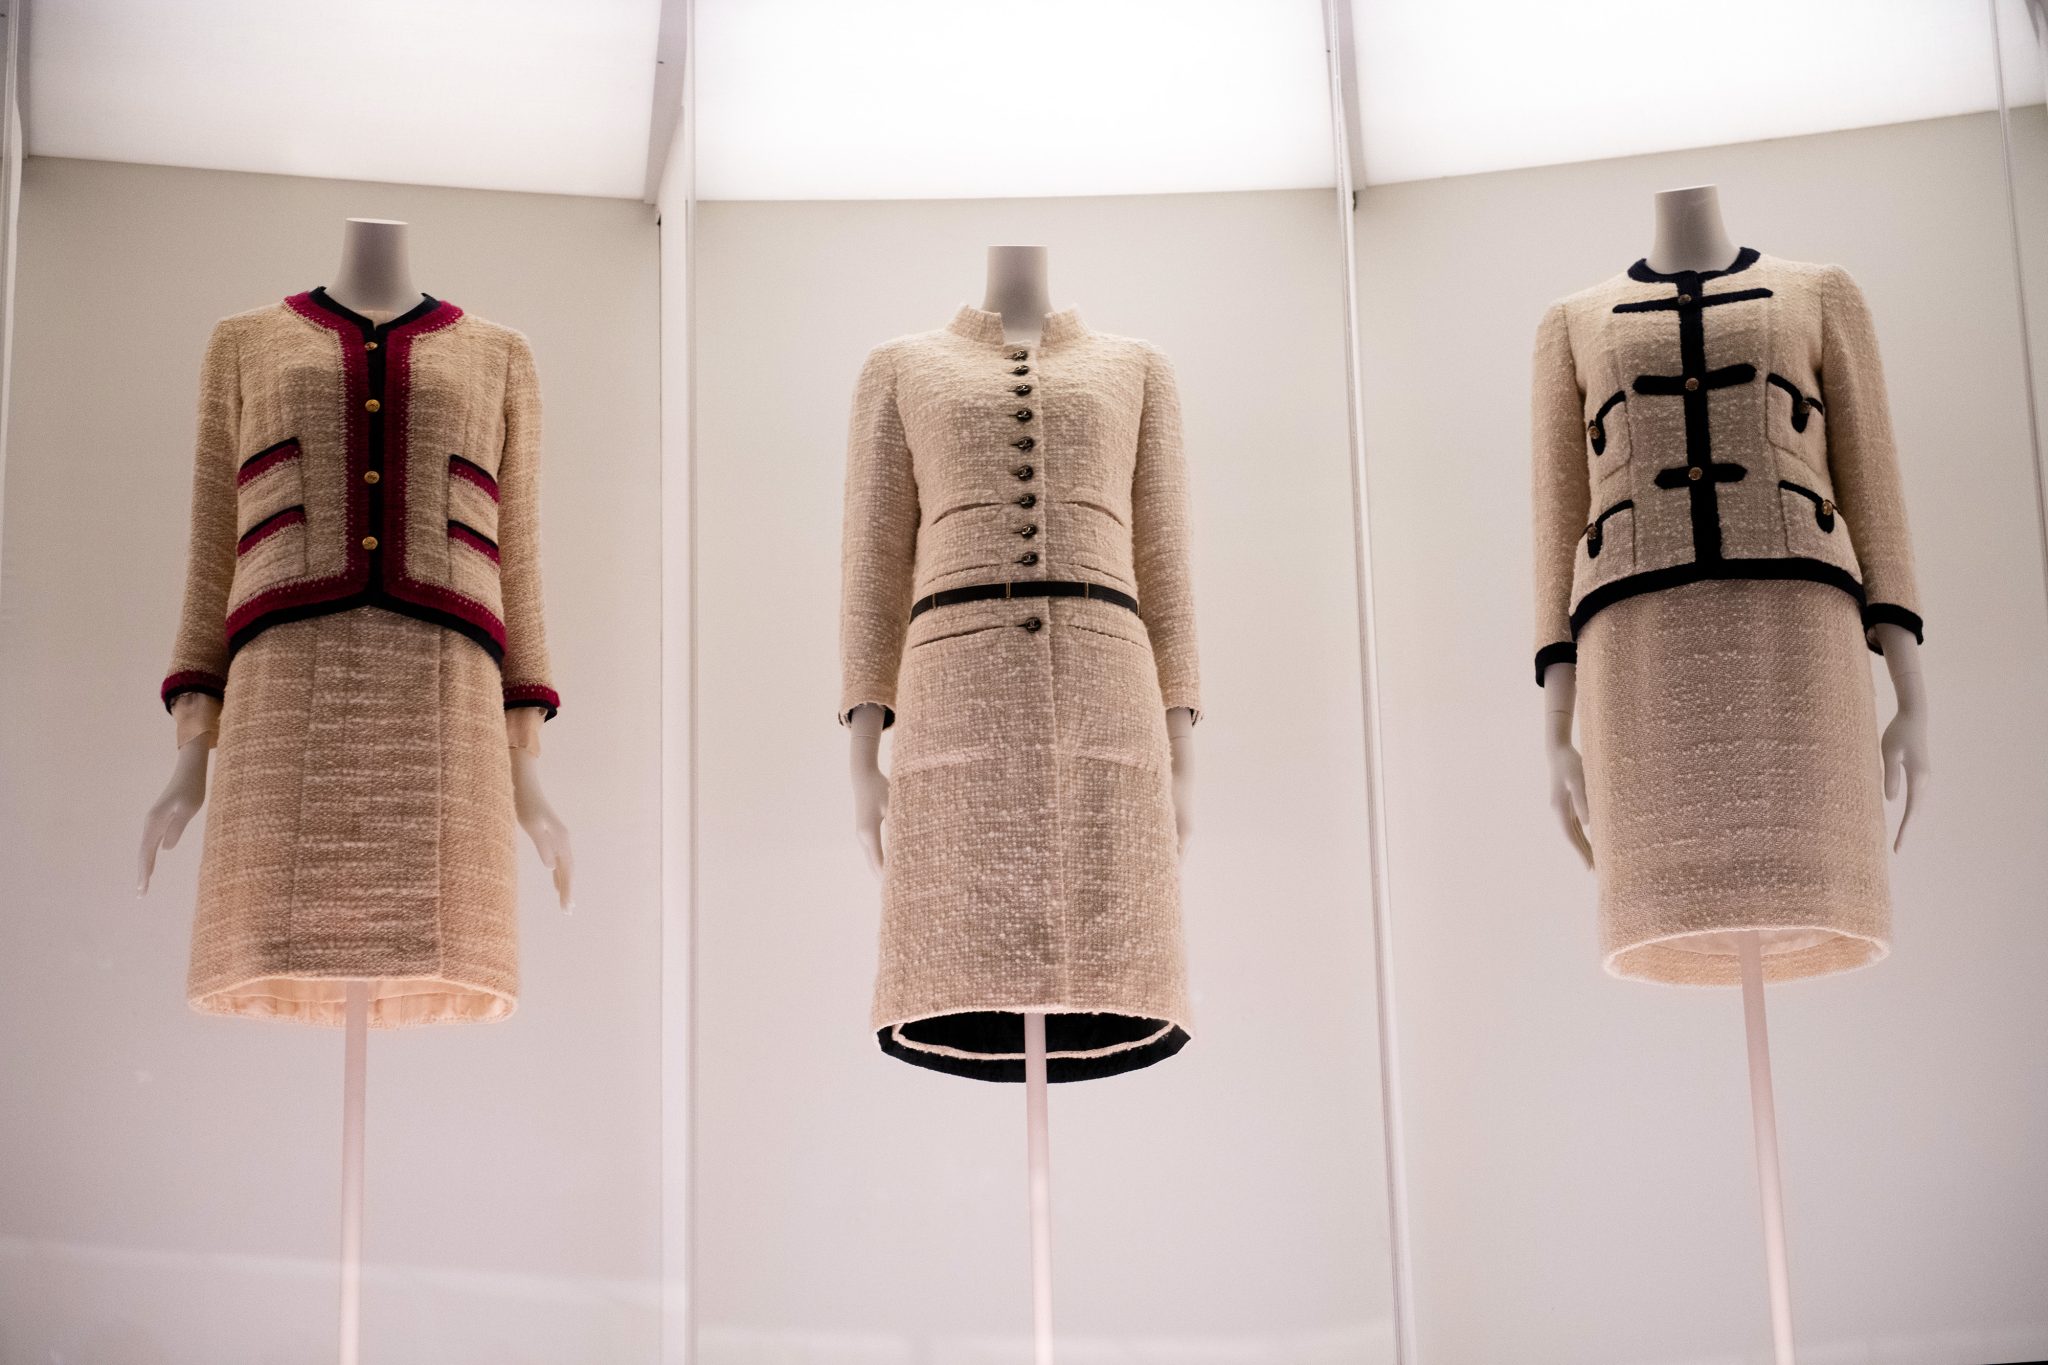 Chanel: More Than a Century of Classic Design